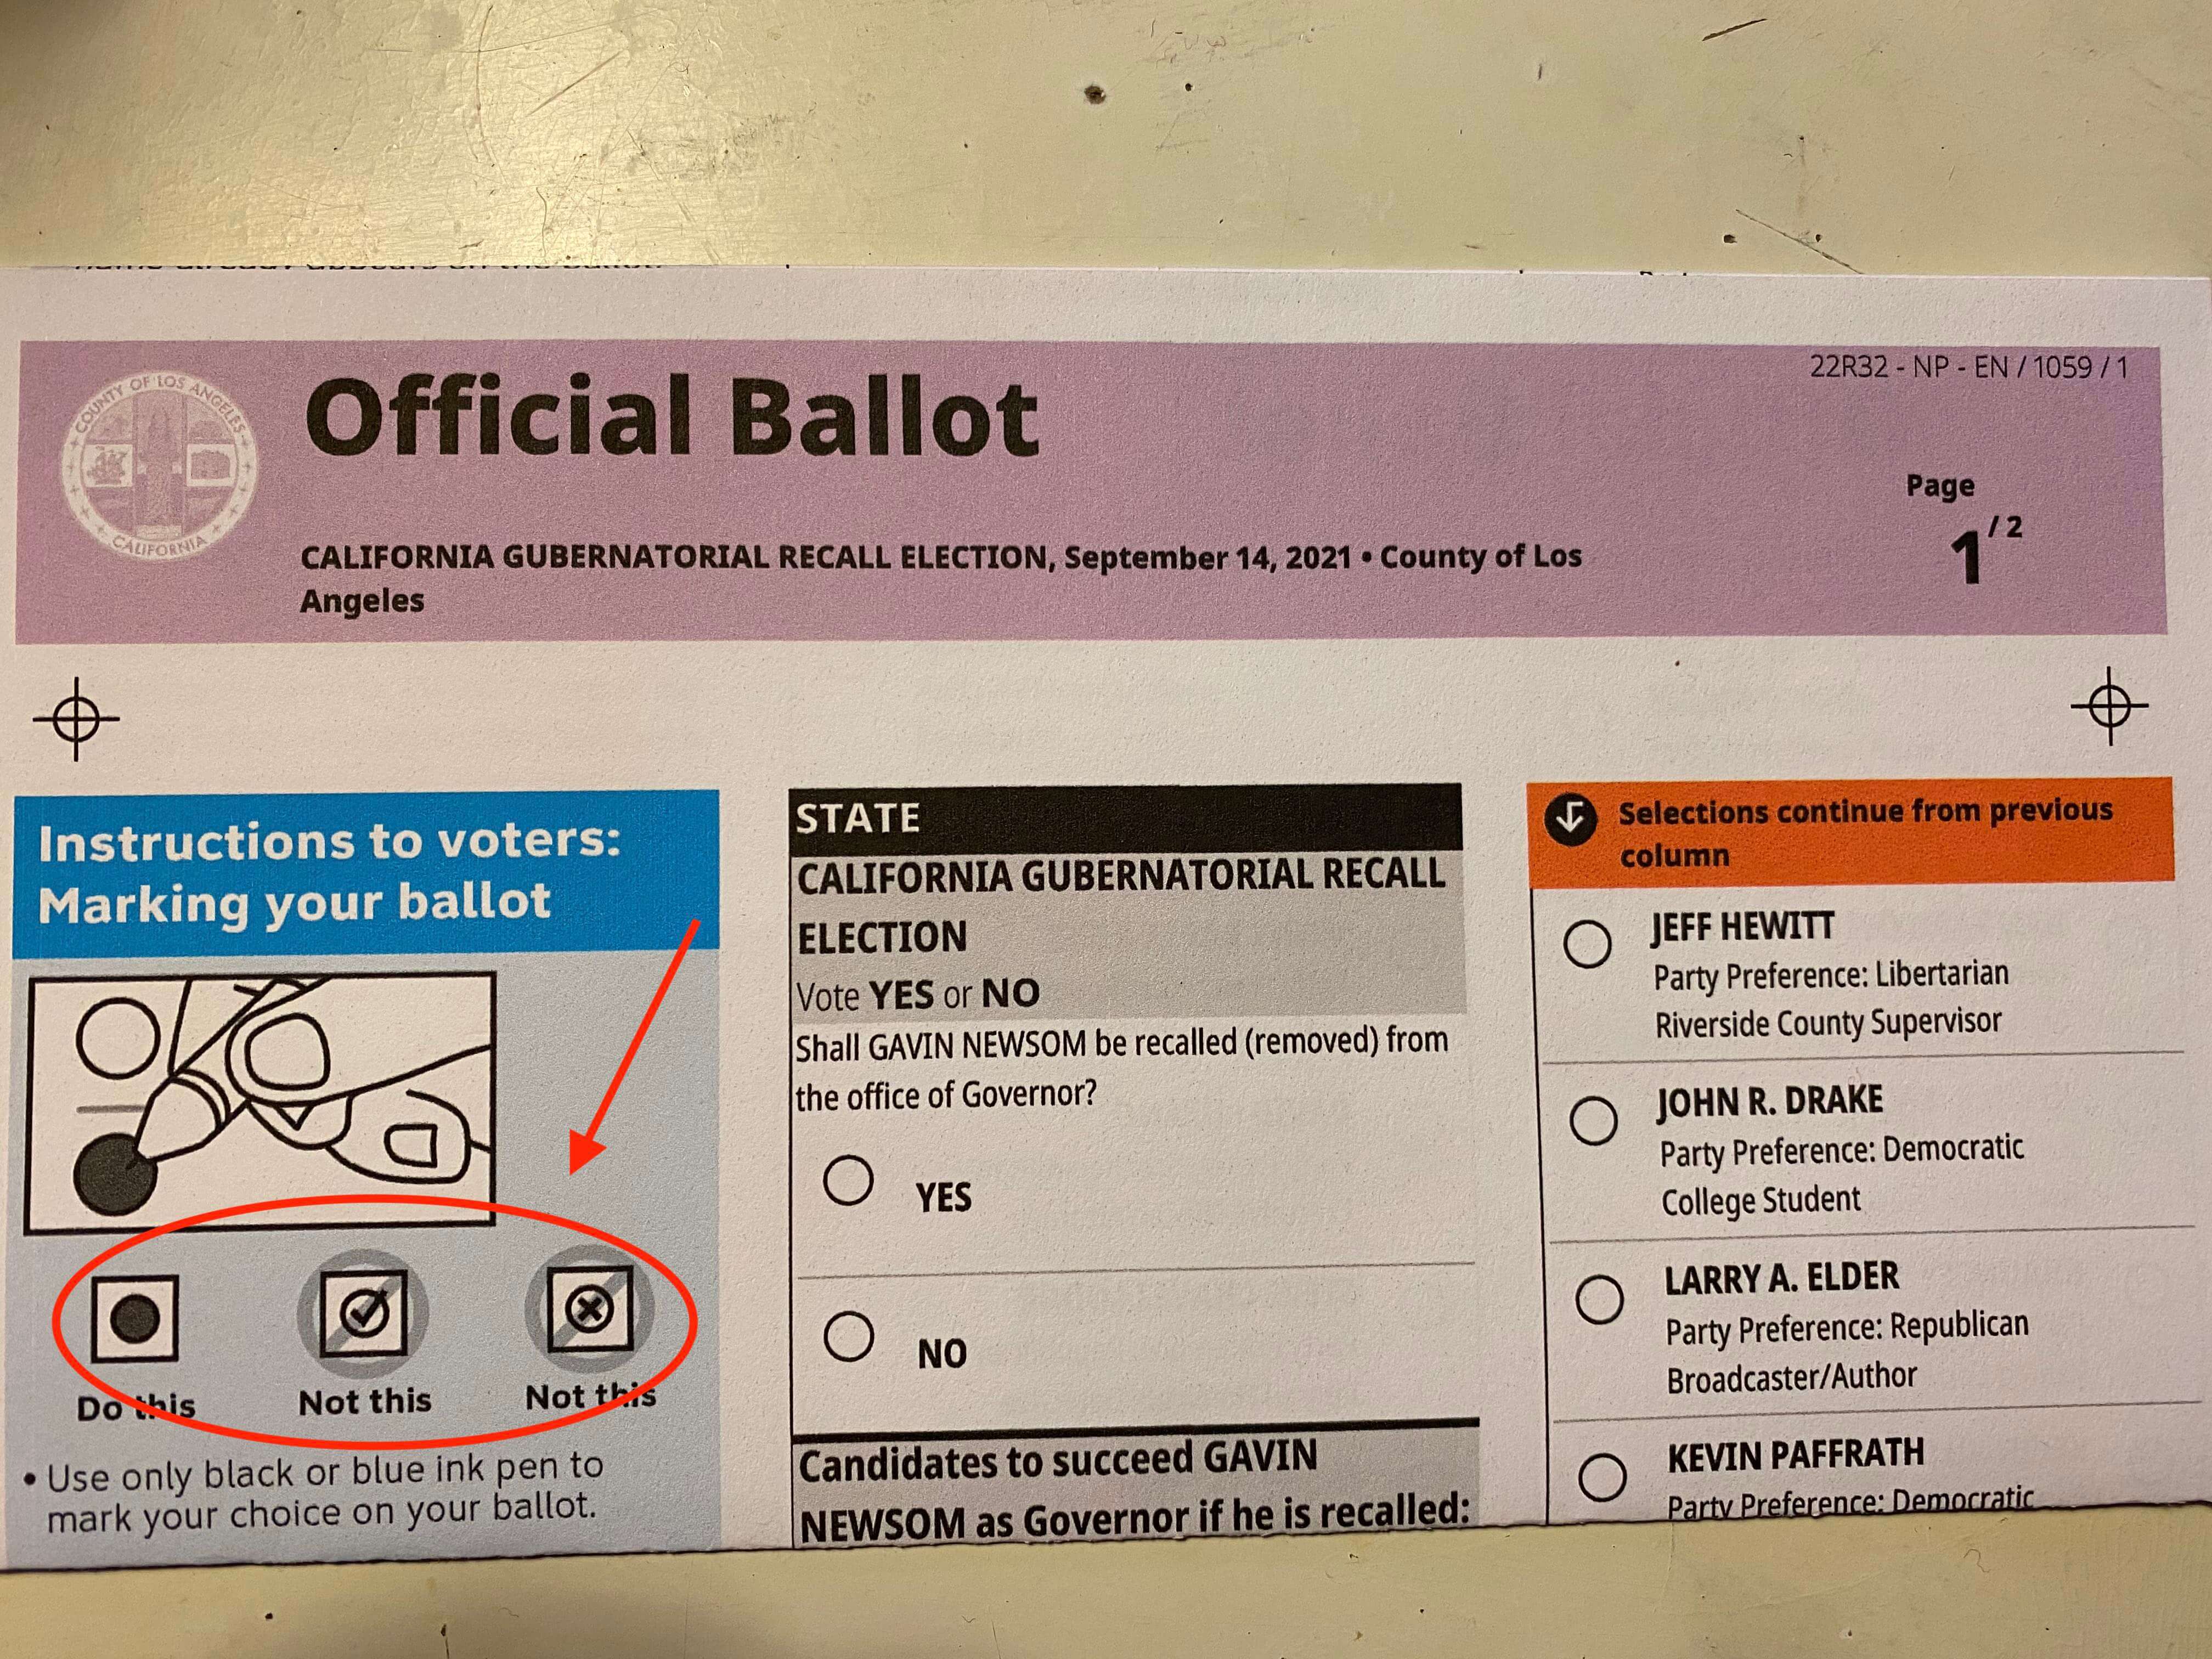 Note the example section on the left of the ballot.